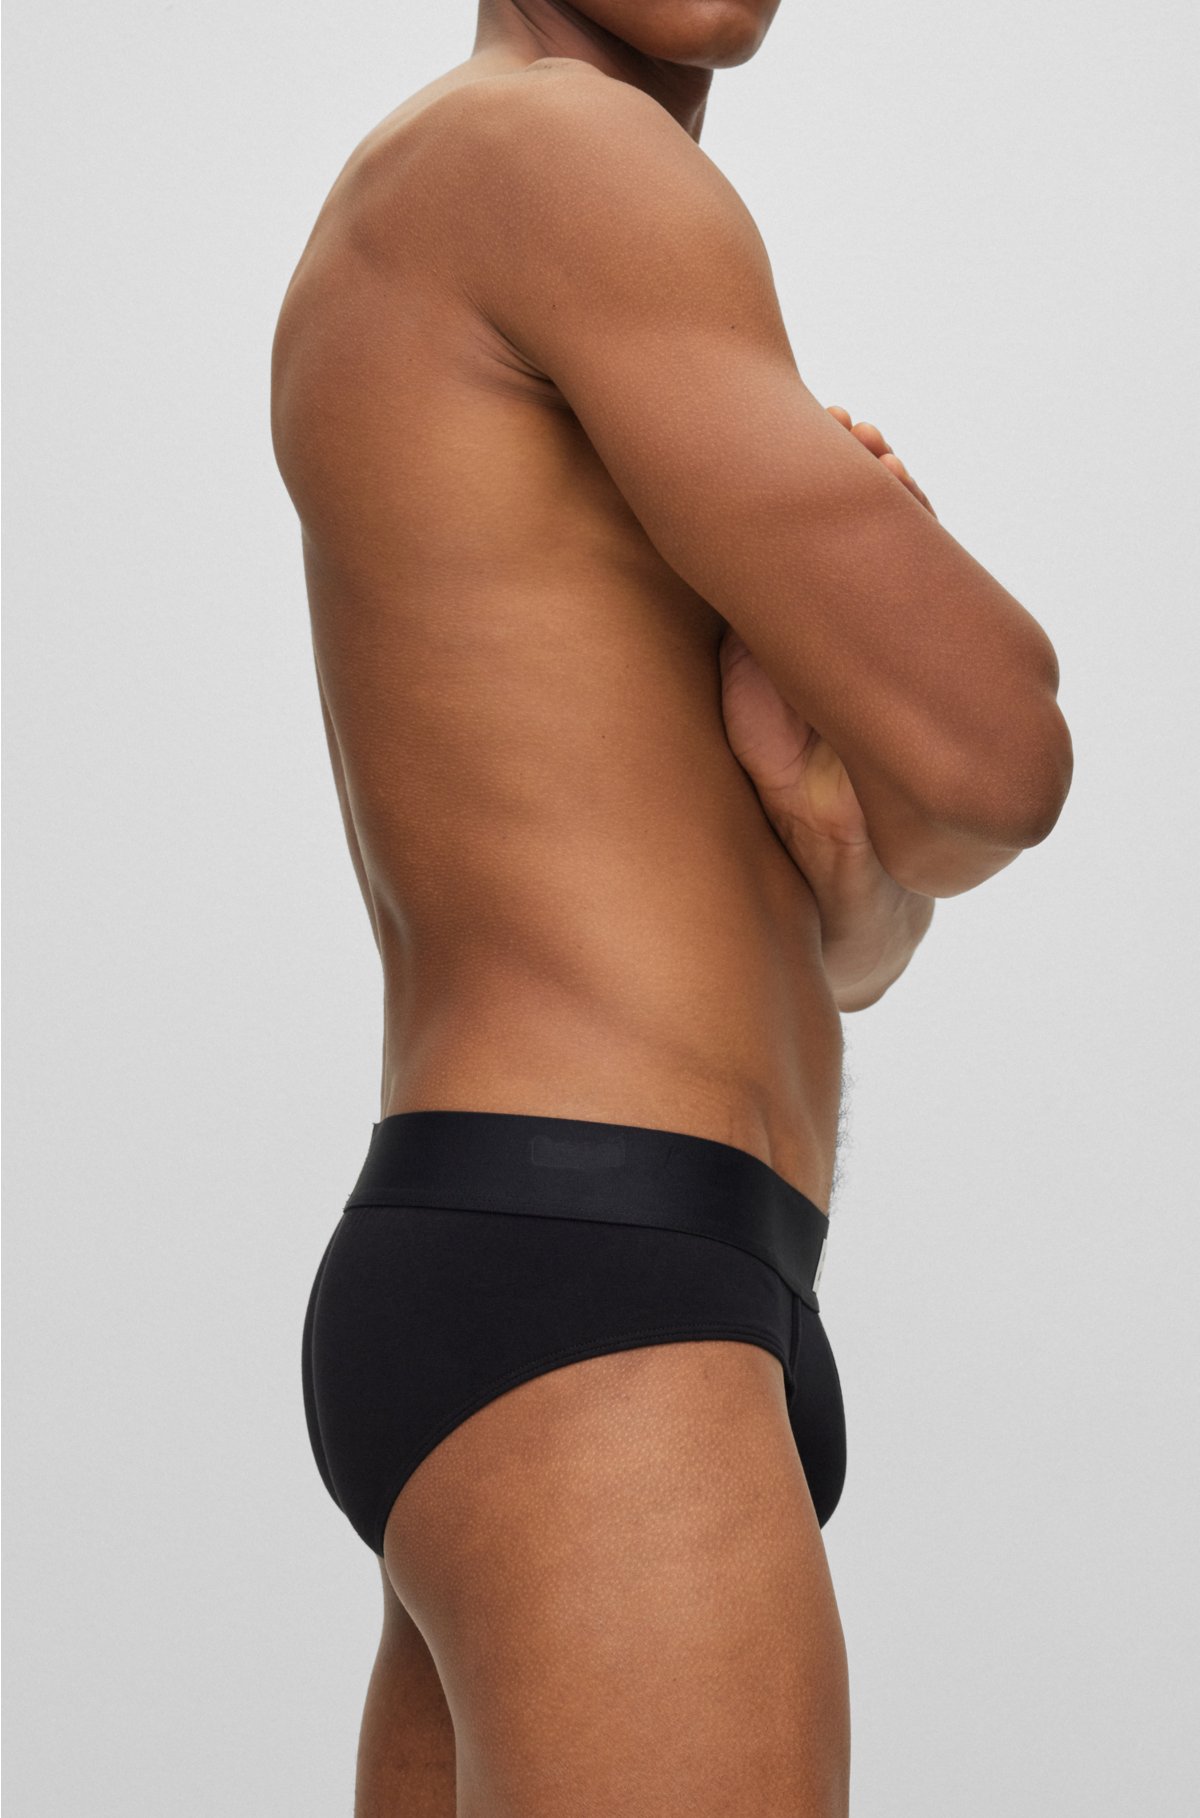 BOSS - Low-rise briefs in stretch cotton with logo waistband